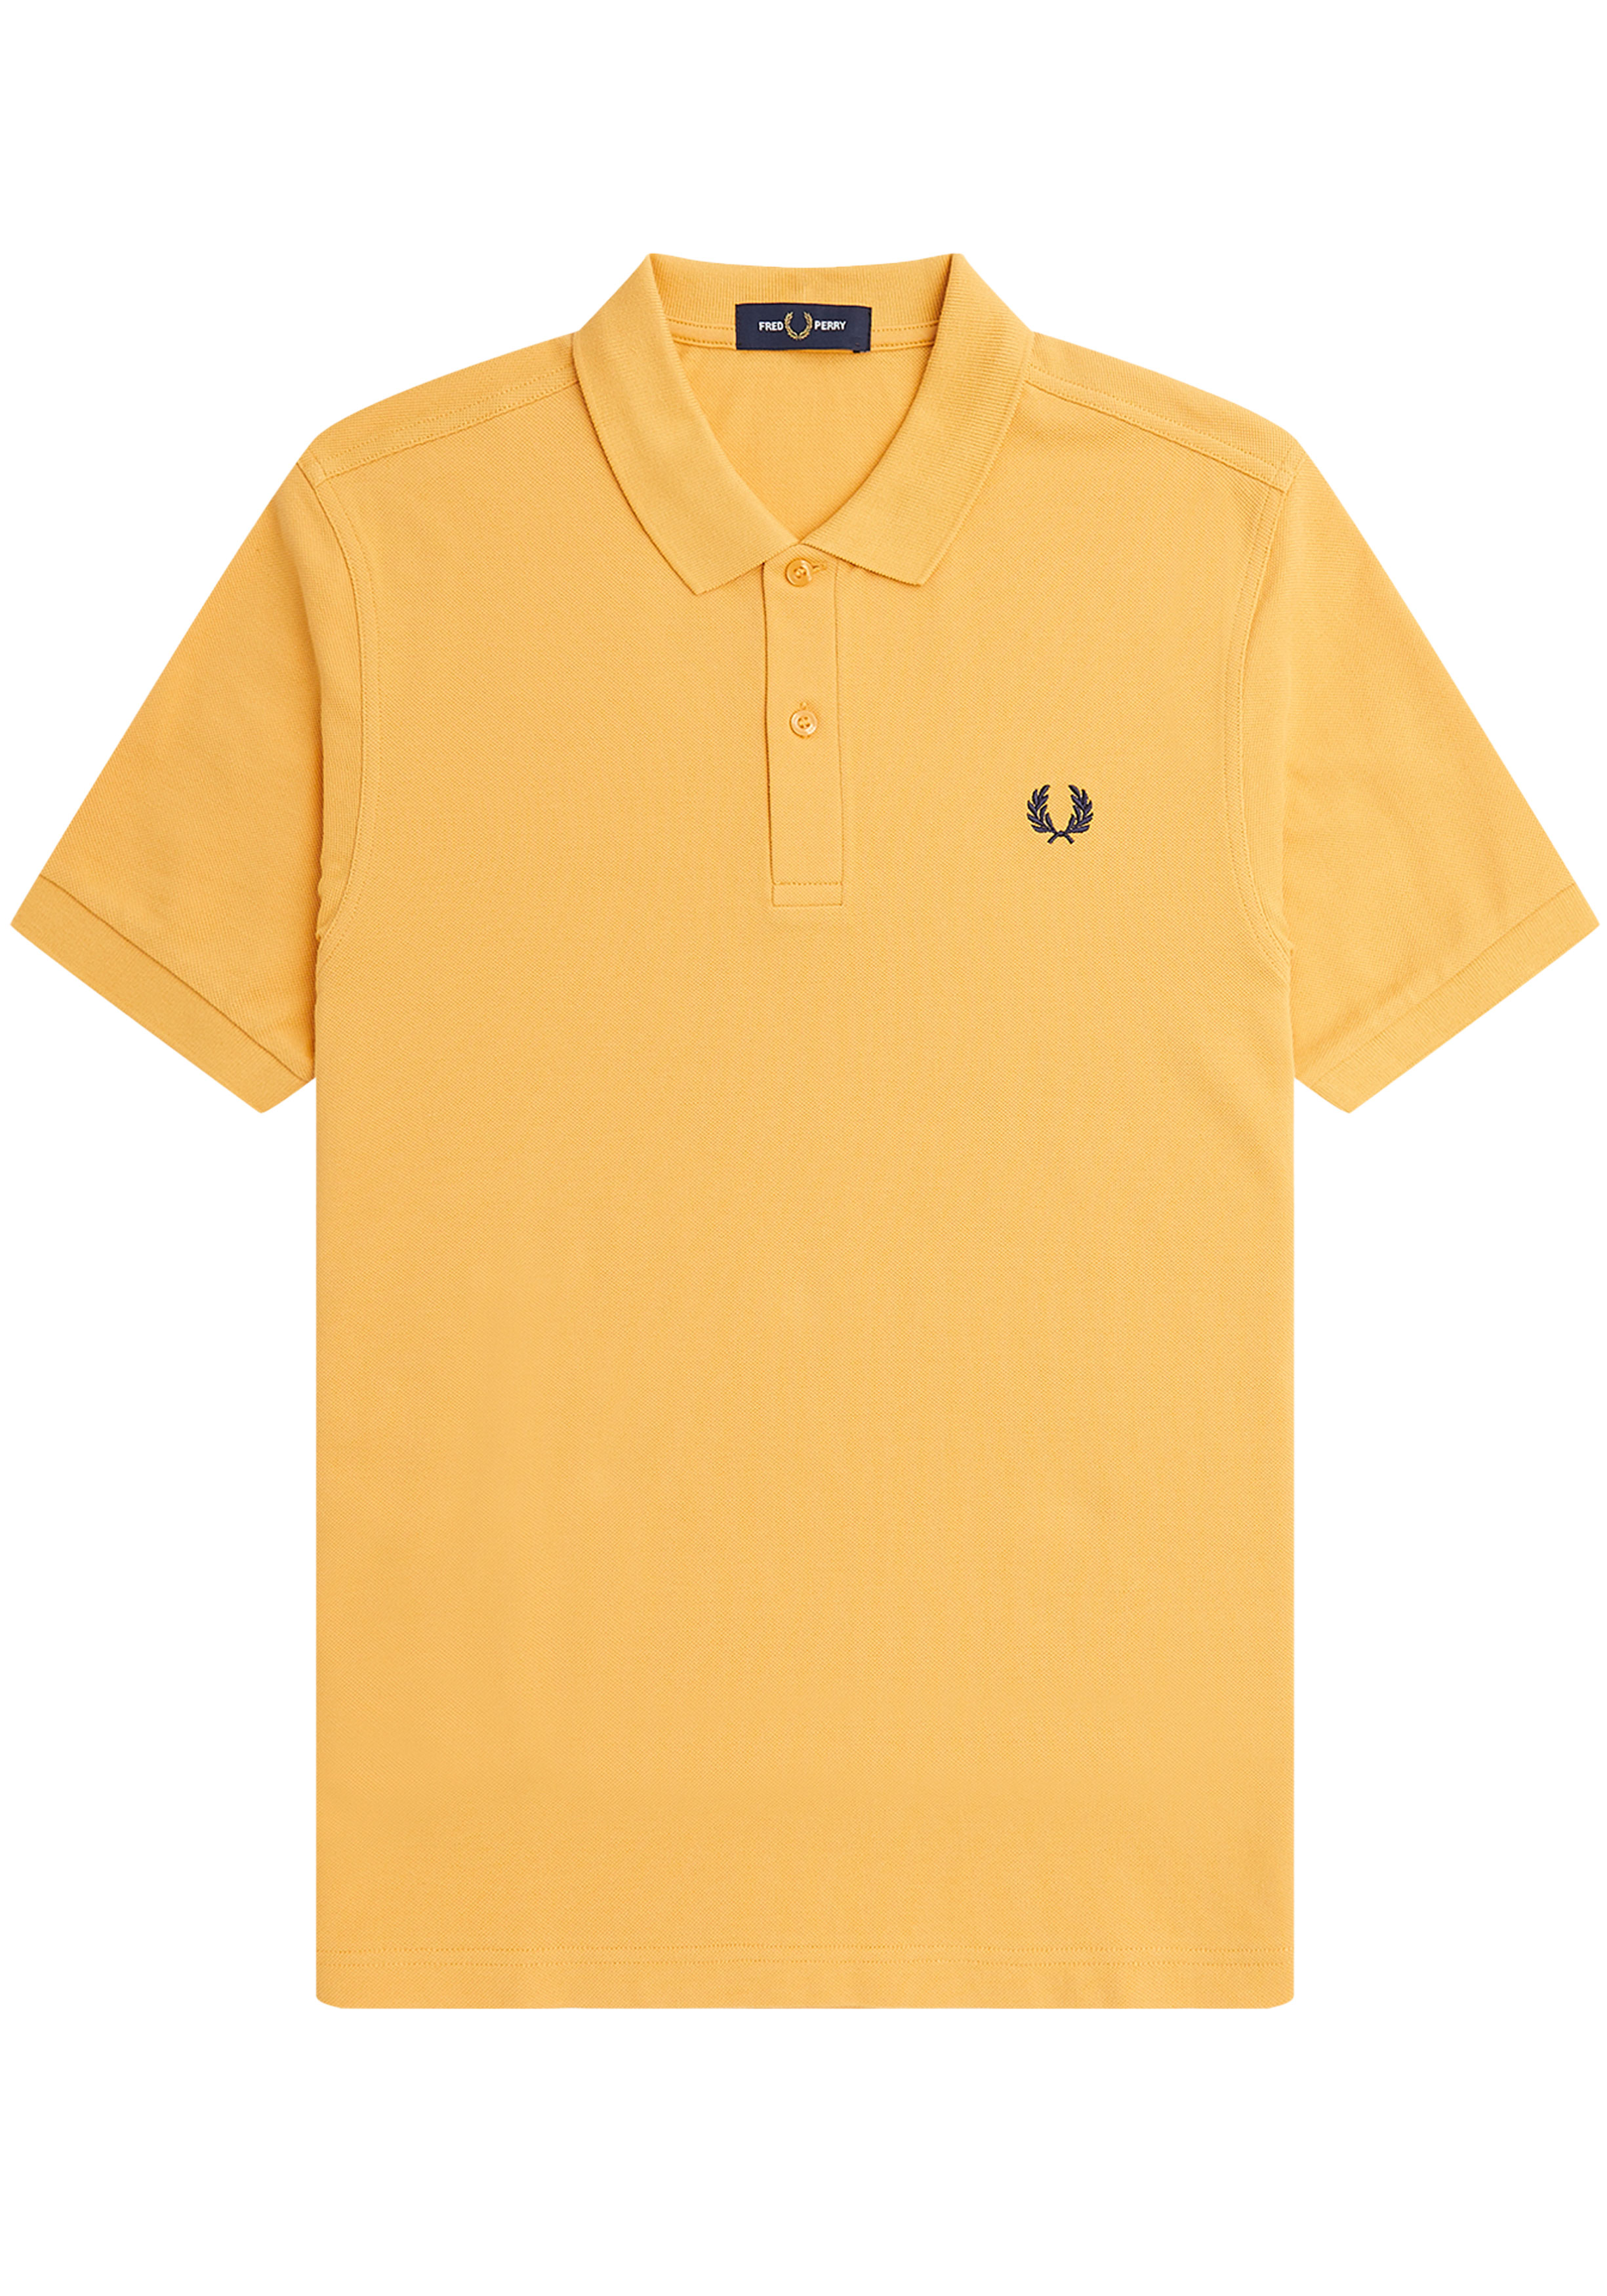 Fred Perry M3600 polo twin tipped shirt, pique, Golden Hour